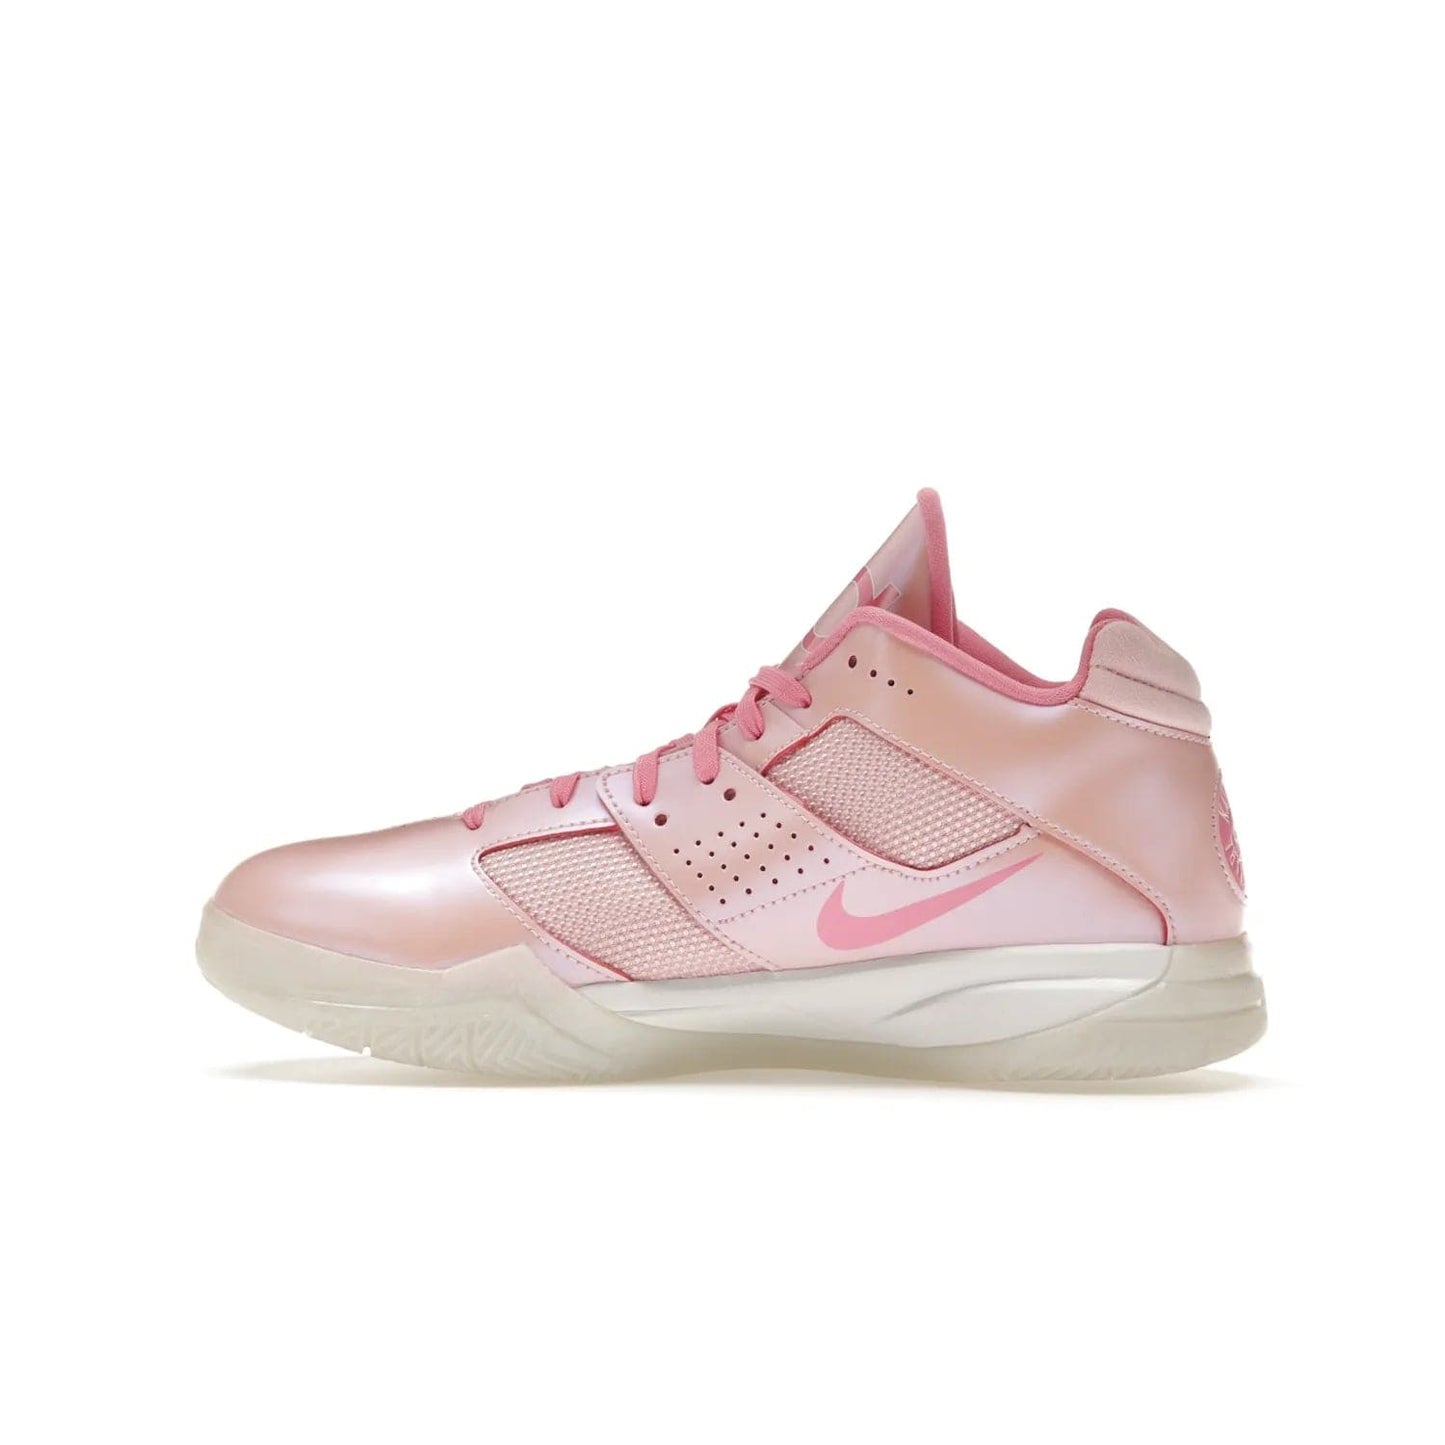 Nike KD 3 Aunt Pearl - Image 20 - Only at www.BallersClubKickz.com - Introducing the Nike KD 3 Aunt Pearl. Featuring a bold Medium Soft Pink, White, & Lotus Pink colorway. Get ready to stand out this October 15th.